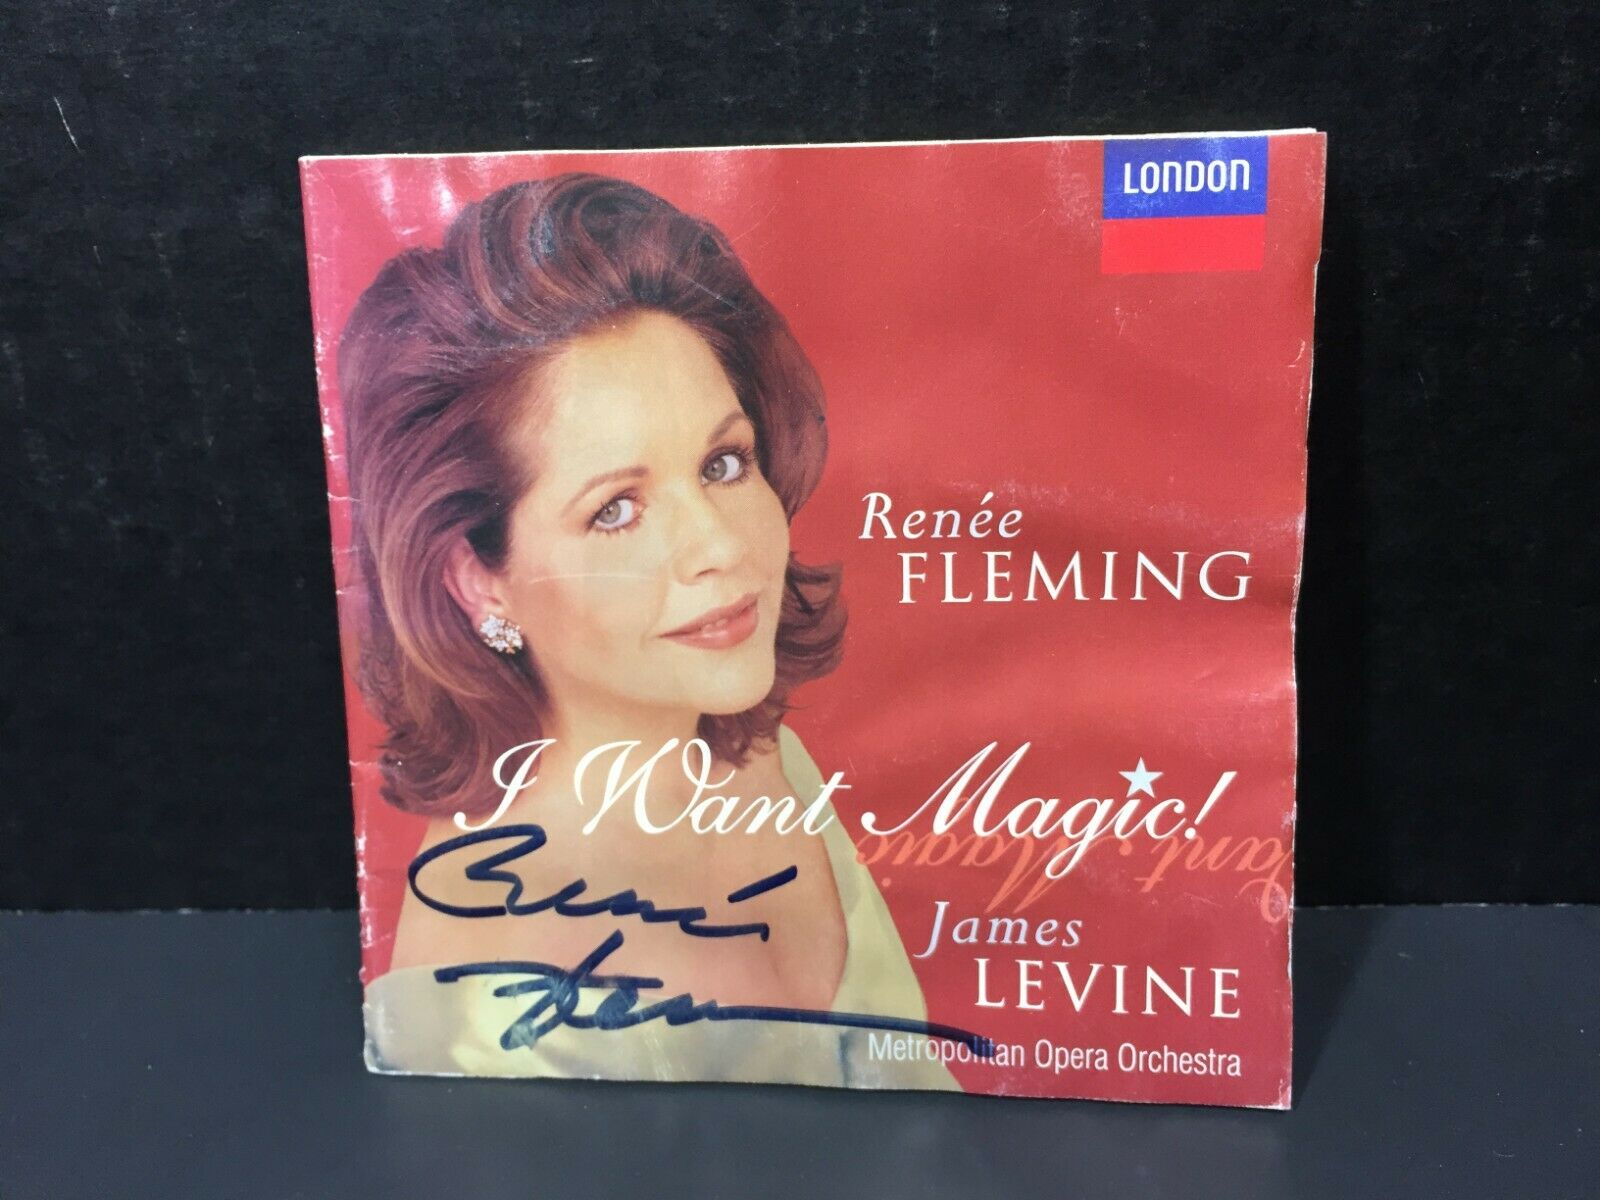 Renee Fleming Opera Singer Signed Cd Sleeve Cover Only W/ Wear